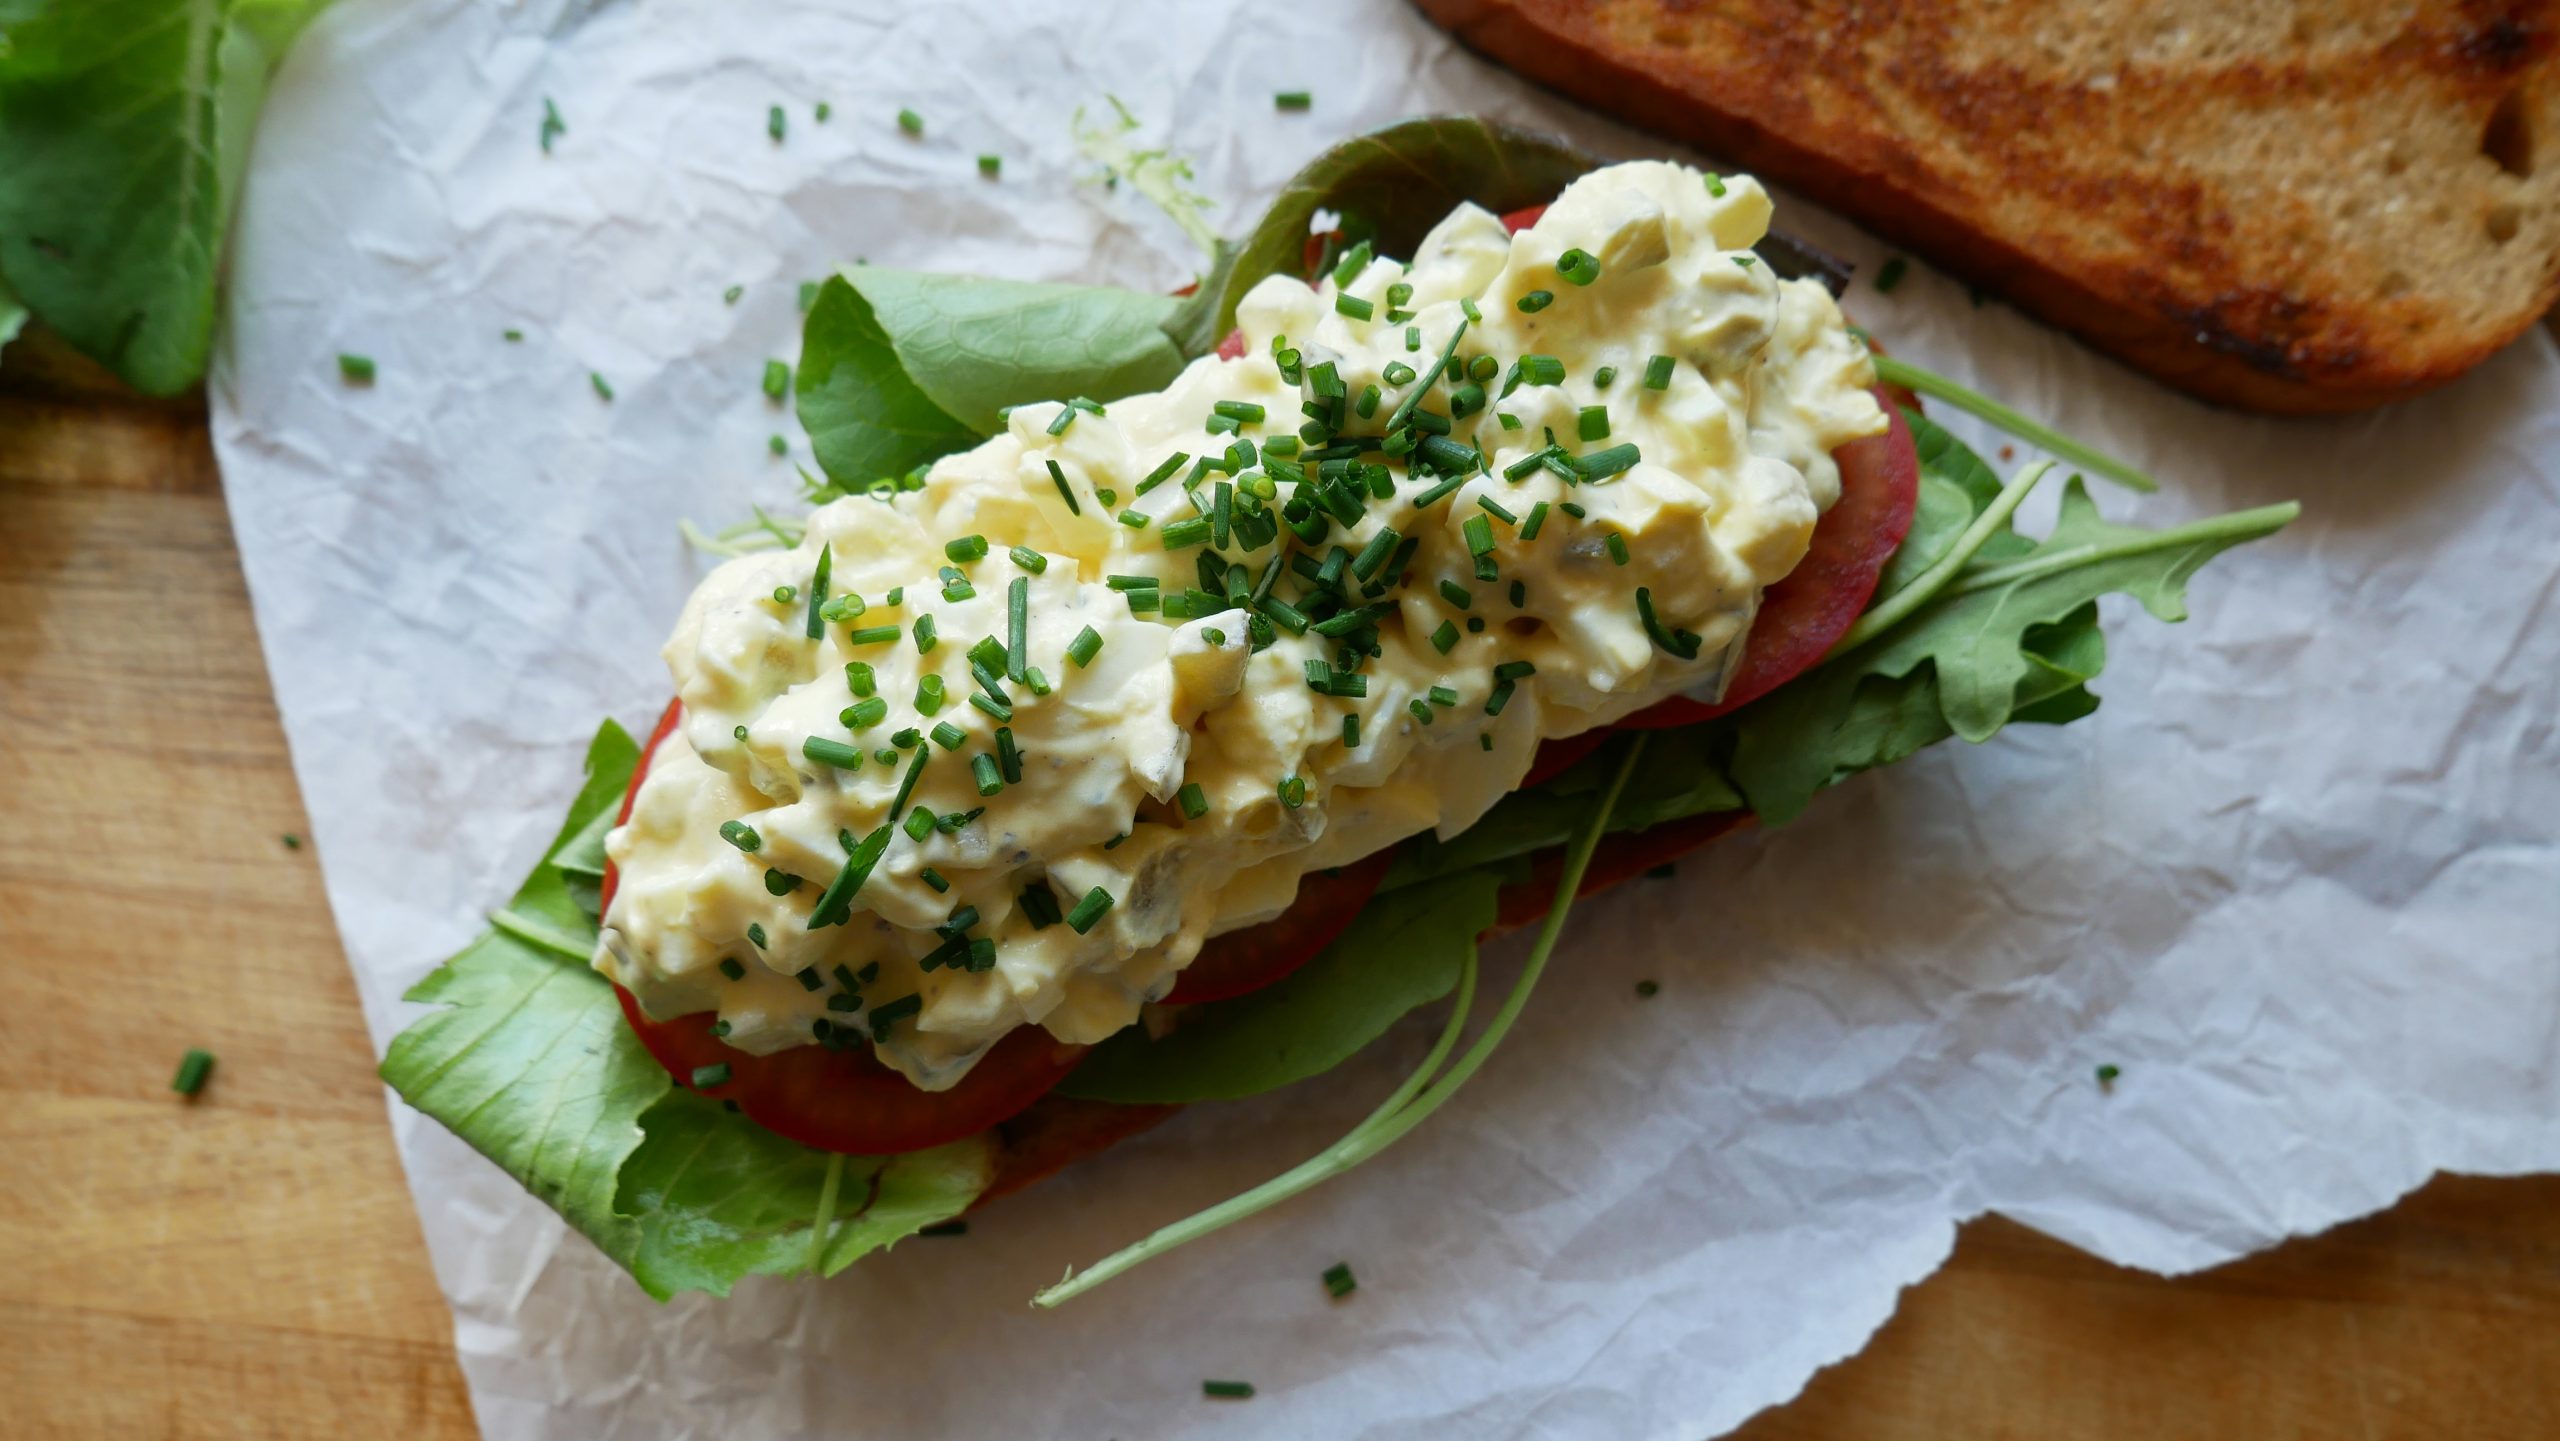 Egg Salad Sandwiches with Tomatoes & Salad